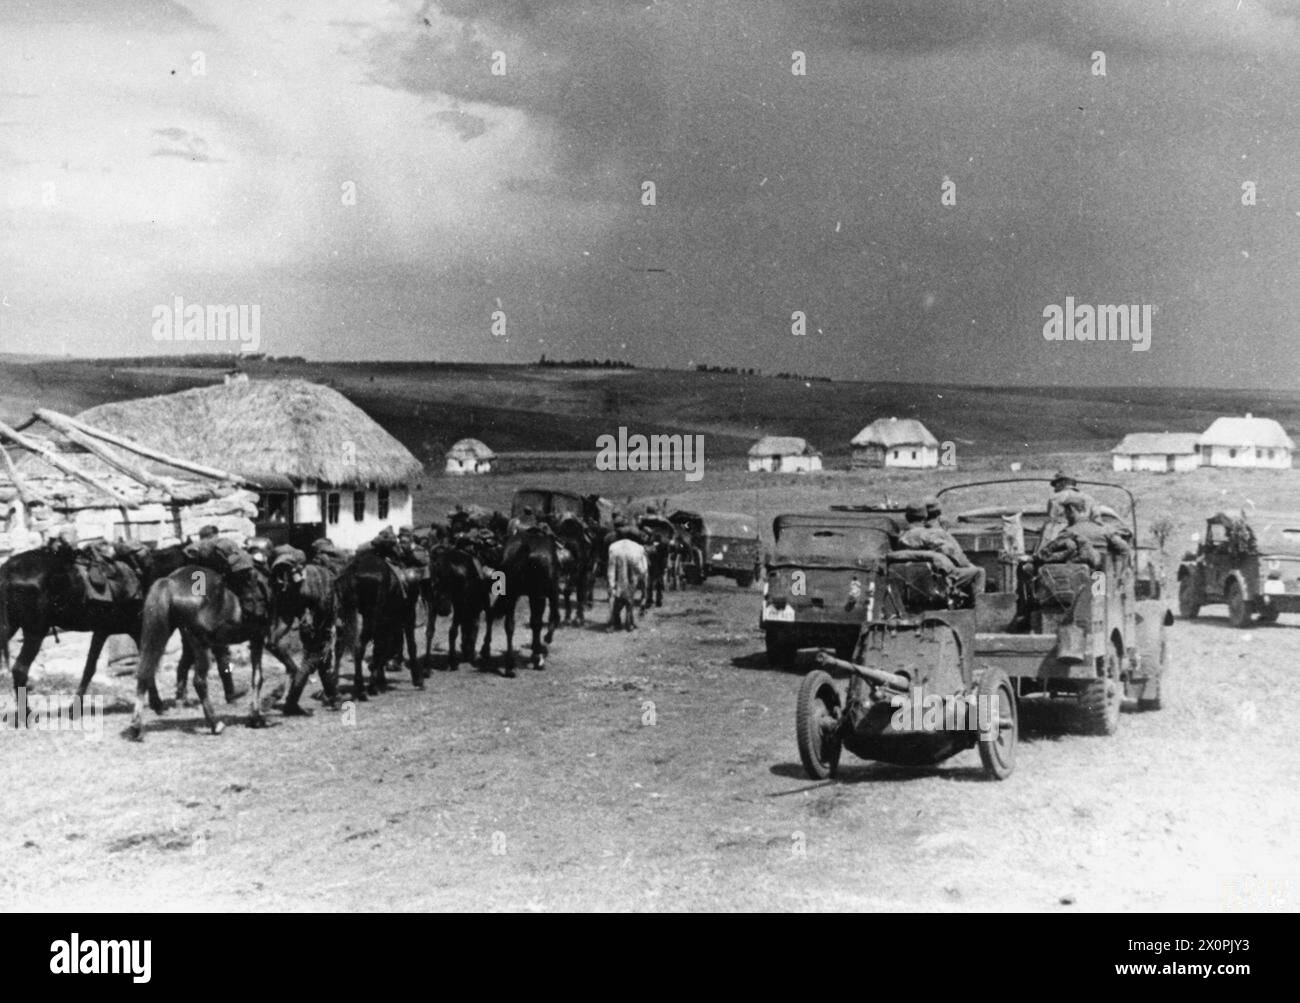 THE GERMAN ARMY ON THE EASTERN FRONT, 1941-1945 - German cavalry, trucks and a towed 37mm anti-tank gun advance through a Russian village in the Ukraine, 1942 Stock Photo